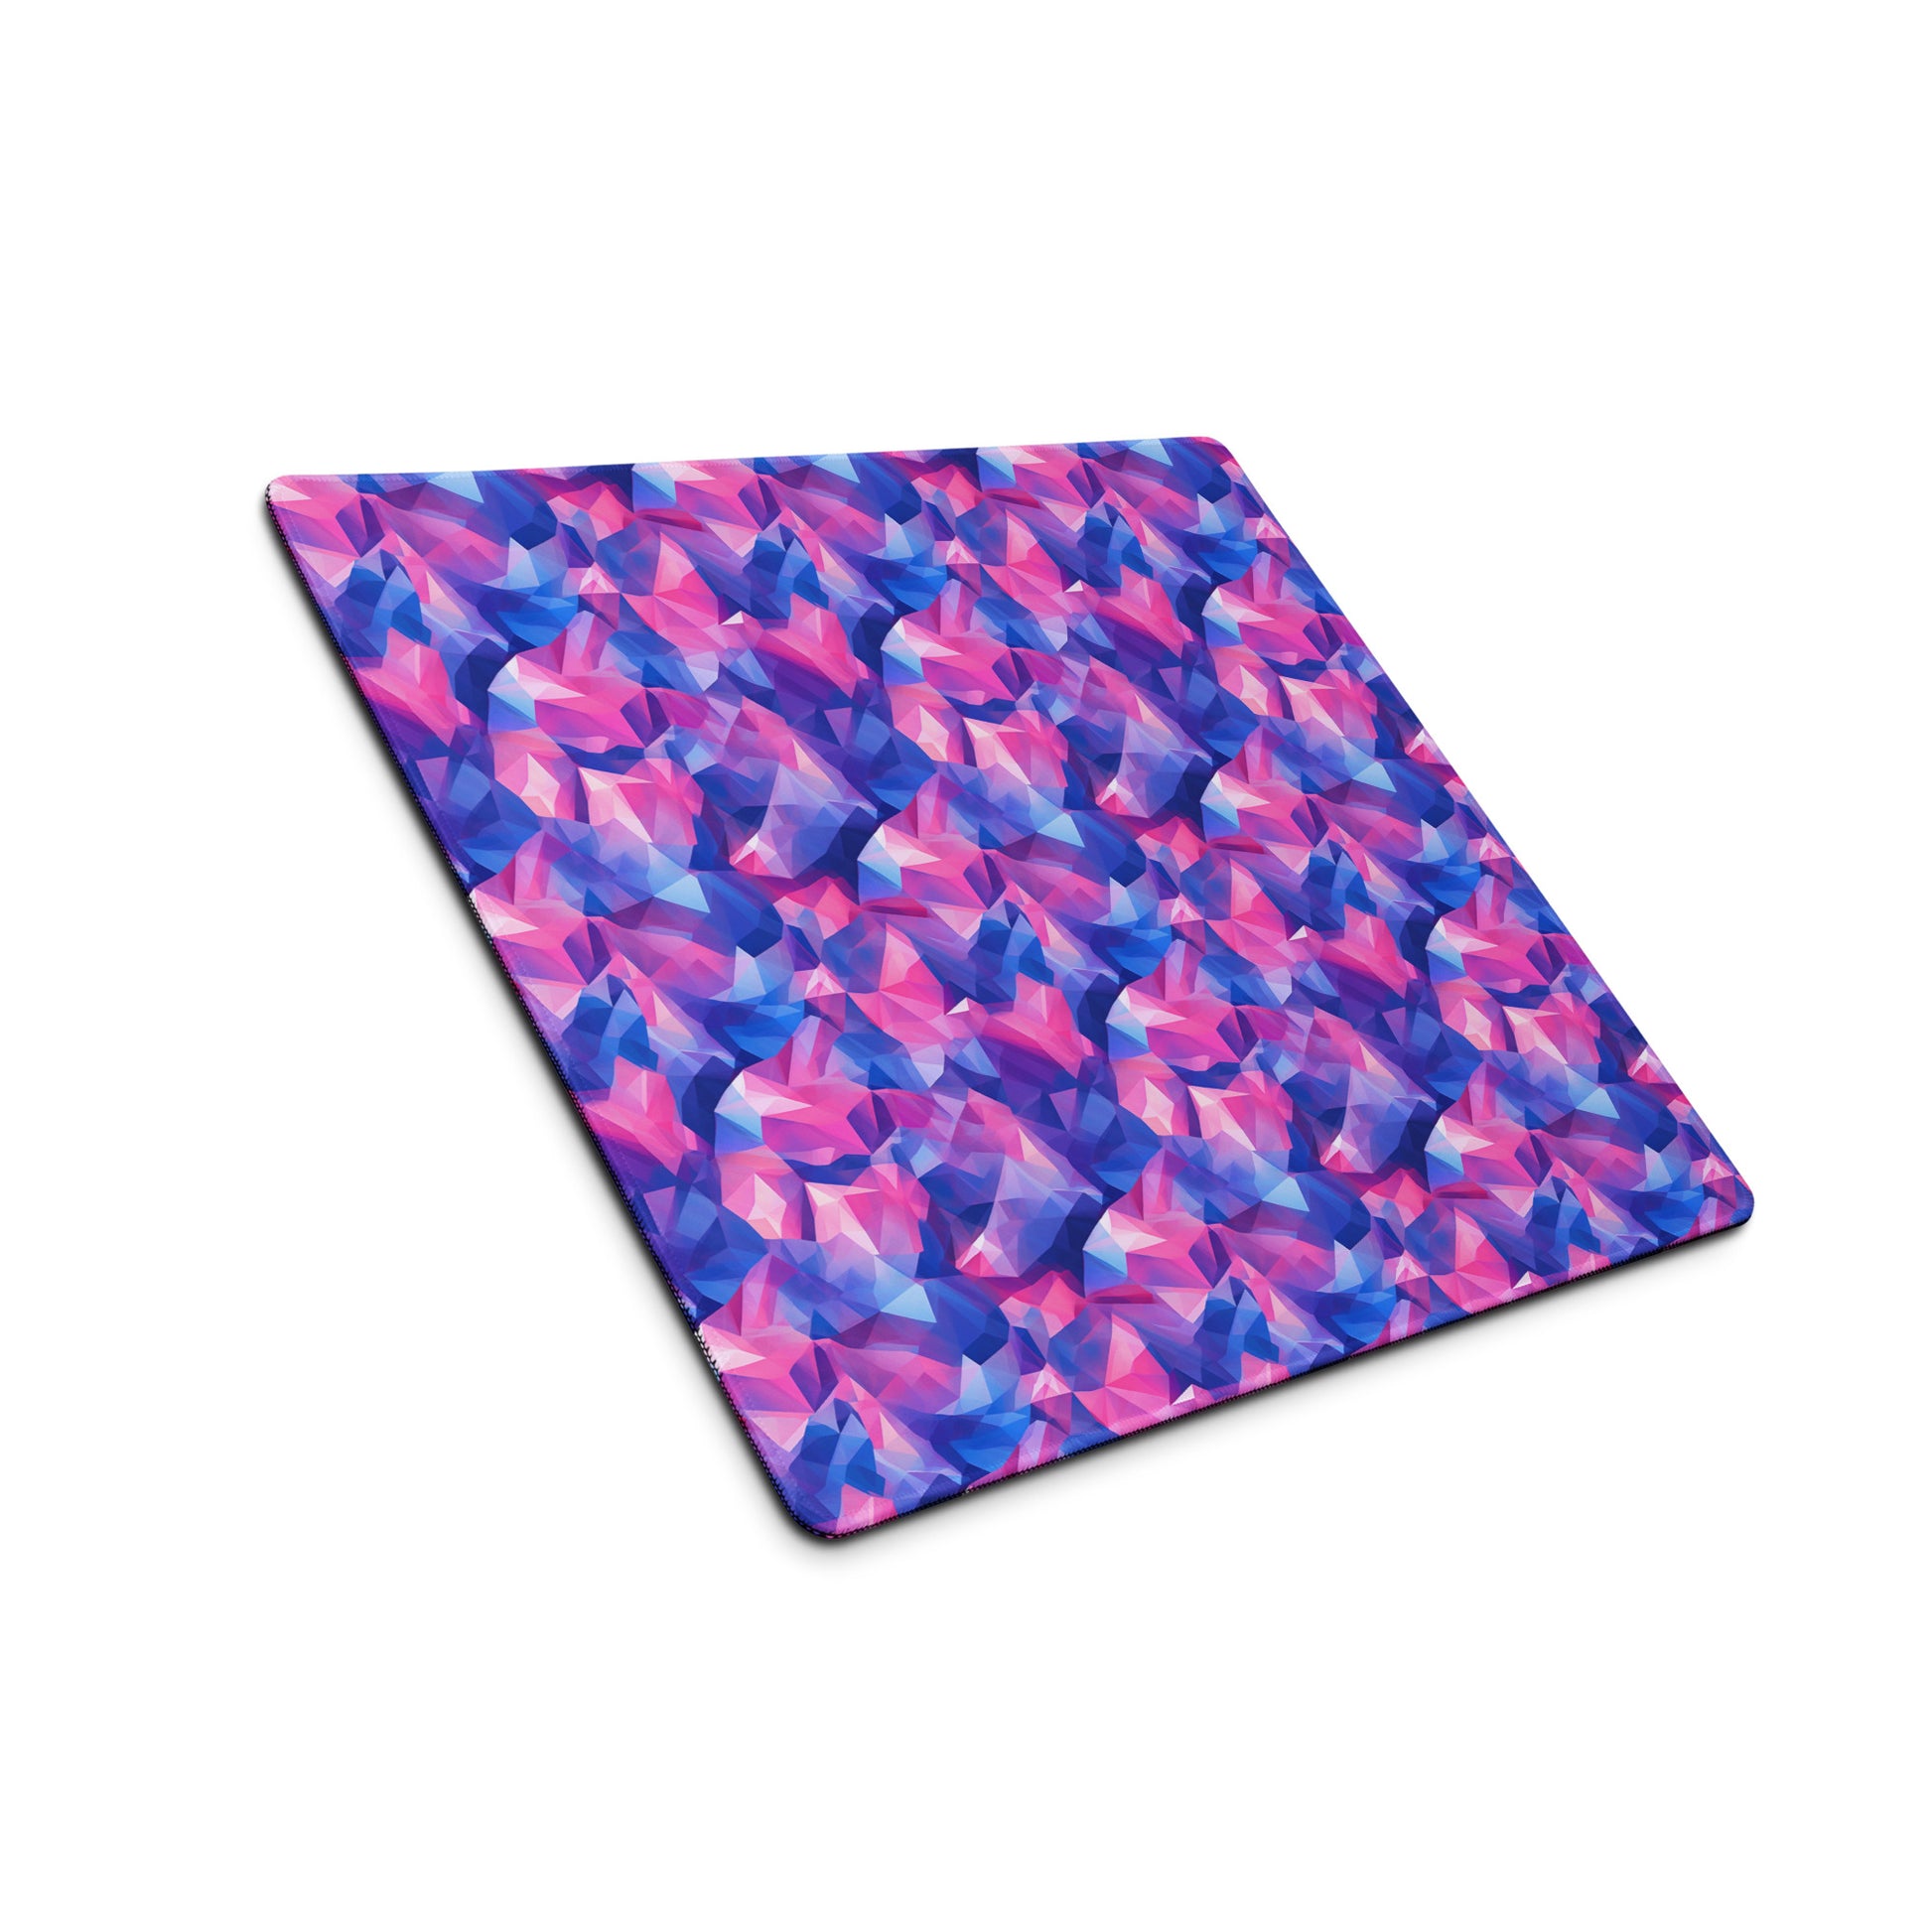 An 18" x 16" gaming desk pad with pink and blue crystals sitting at an angle.